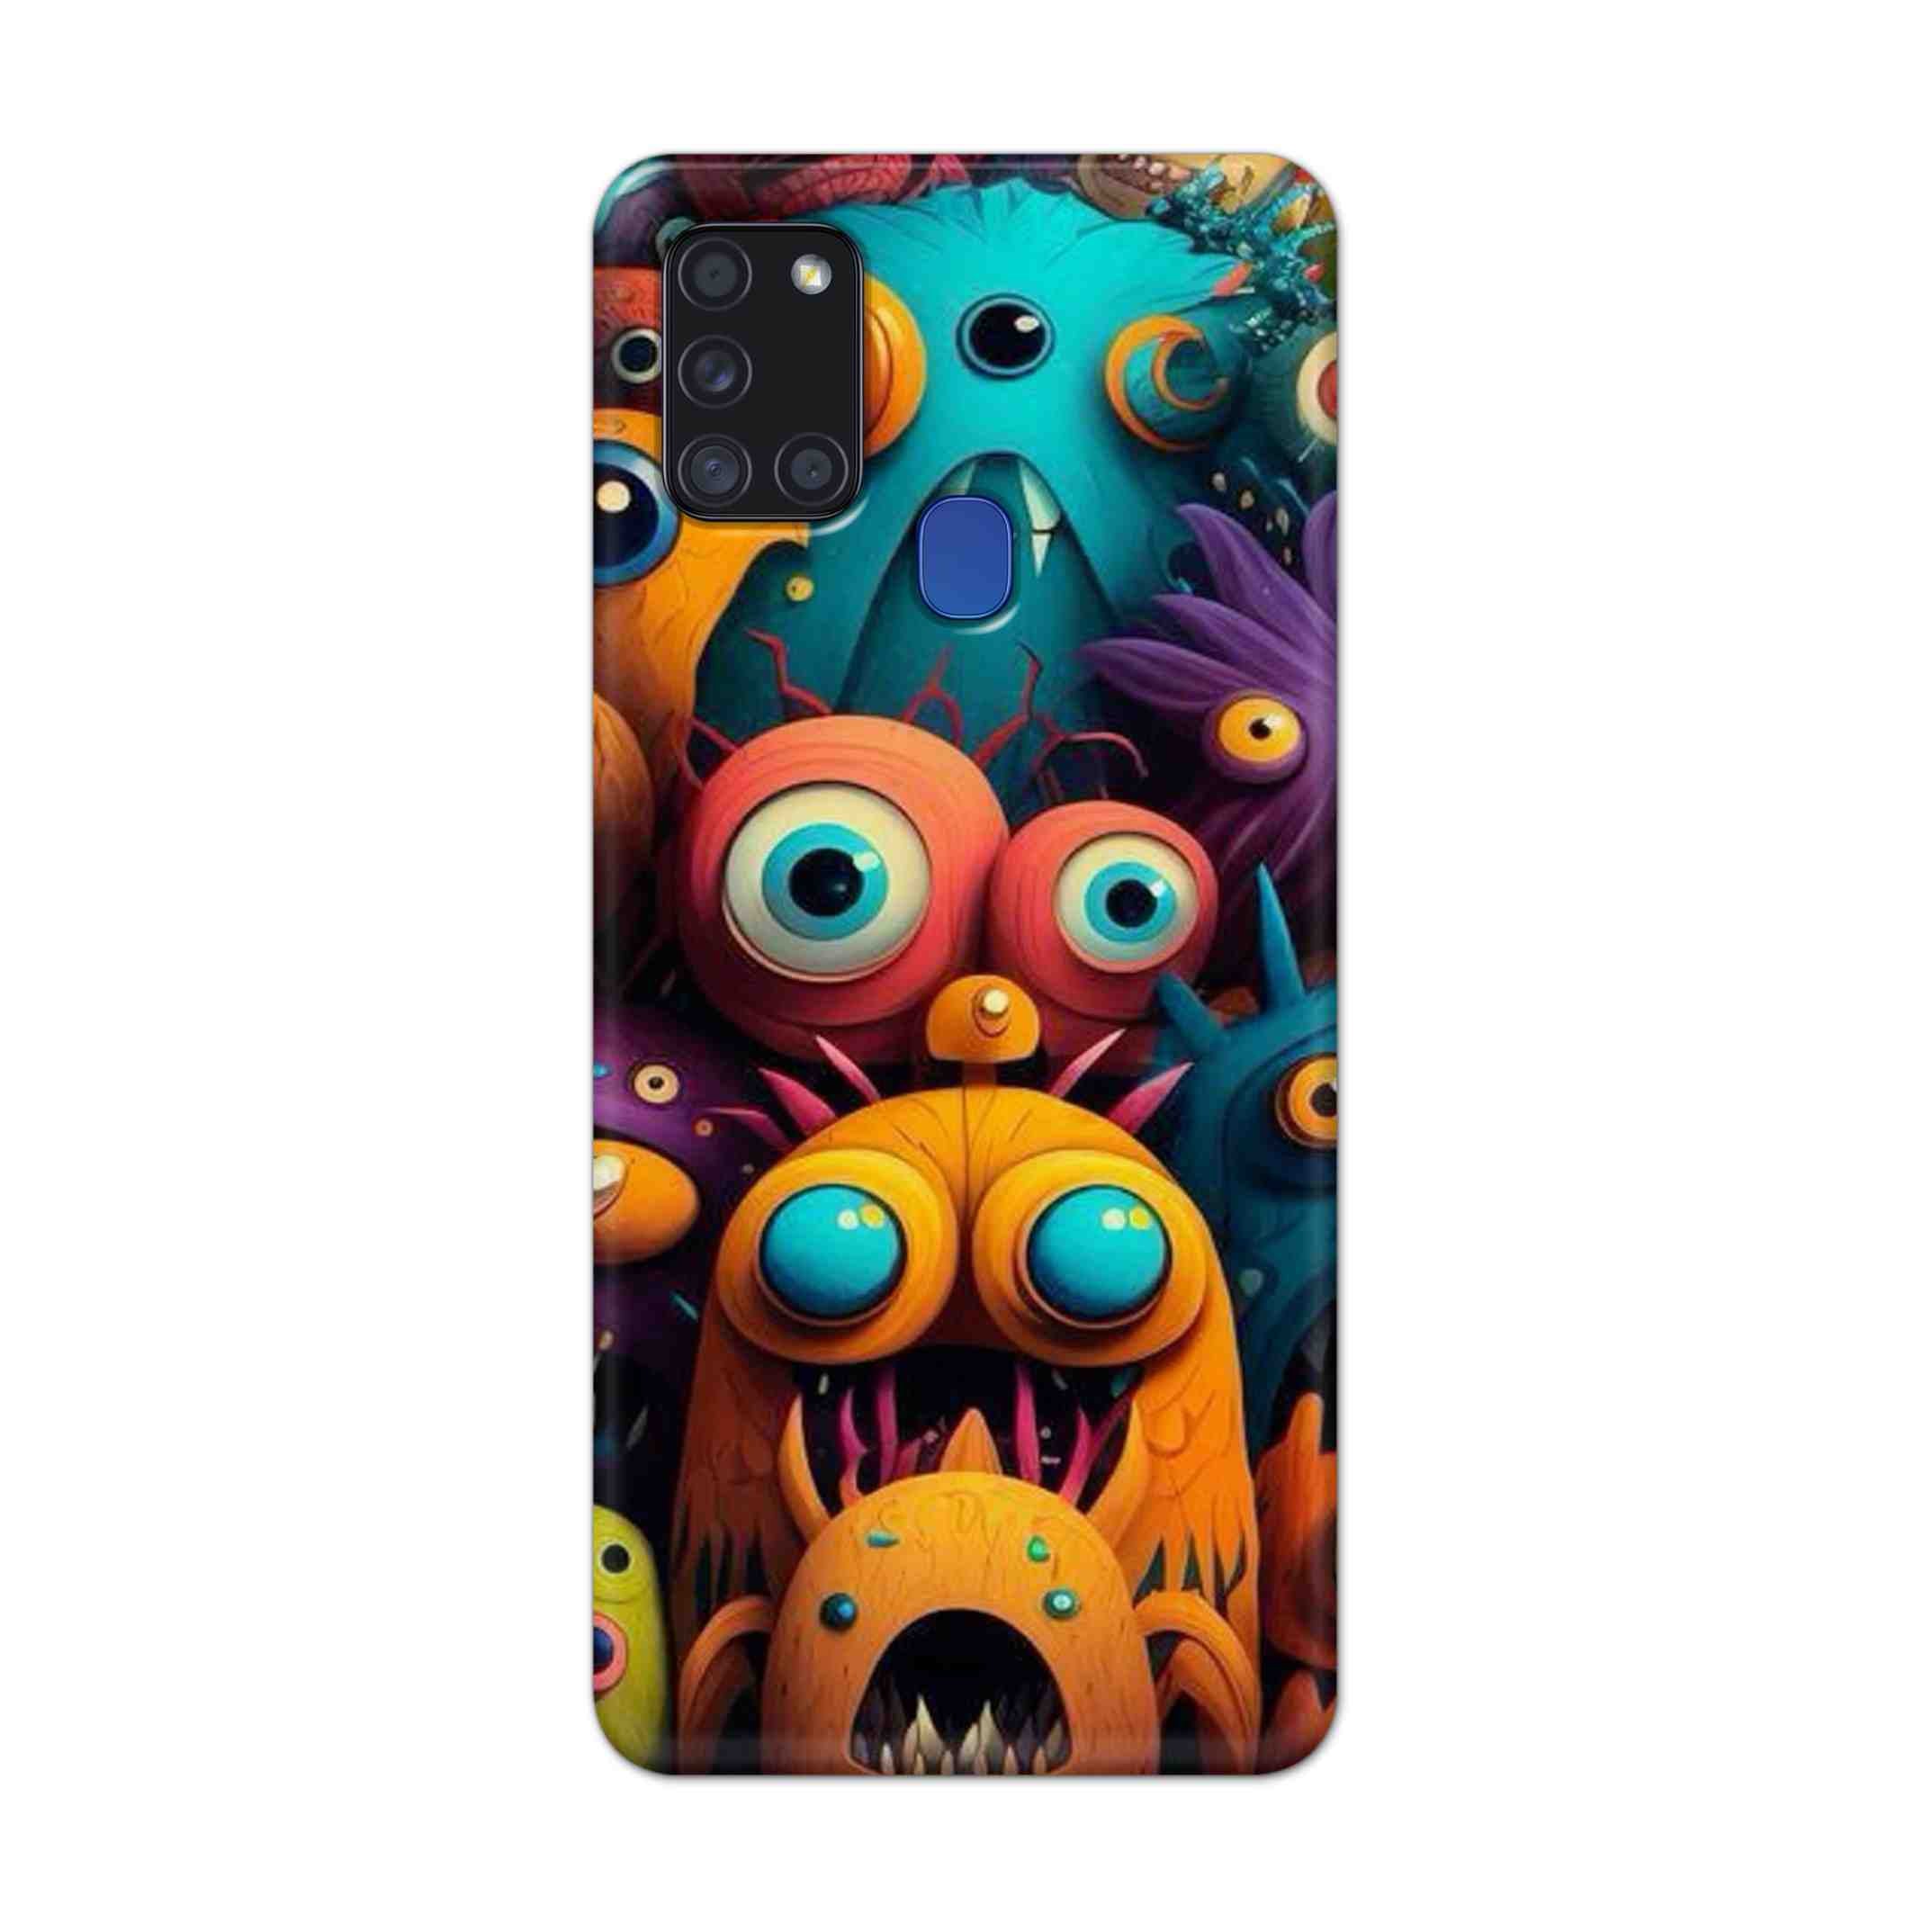 Buy Zombie Hard Back Mobile Phone Case Cover For Samsung Galaxy A21s Online